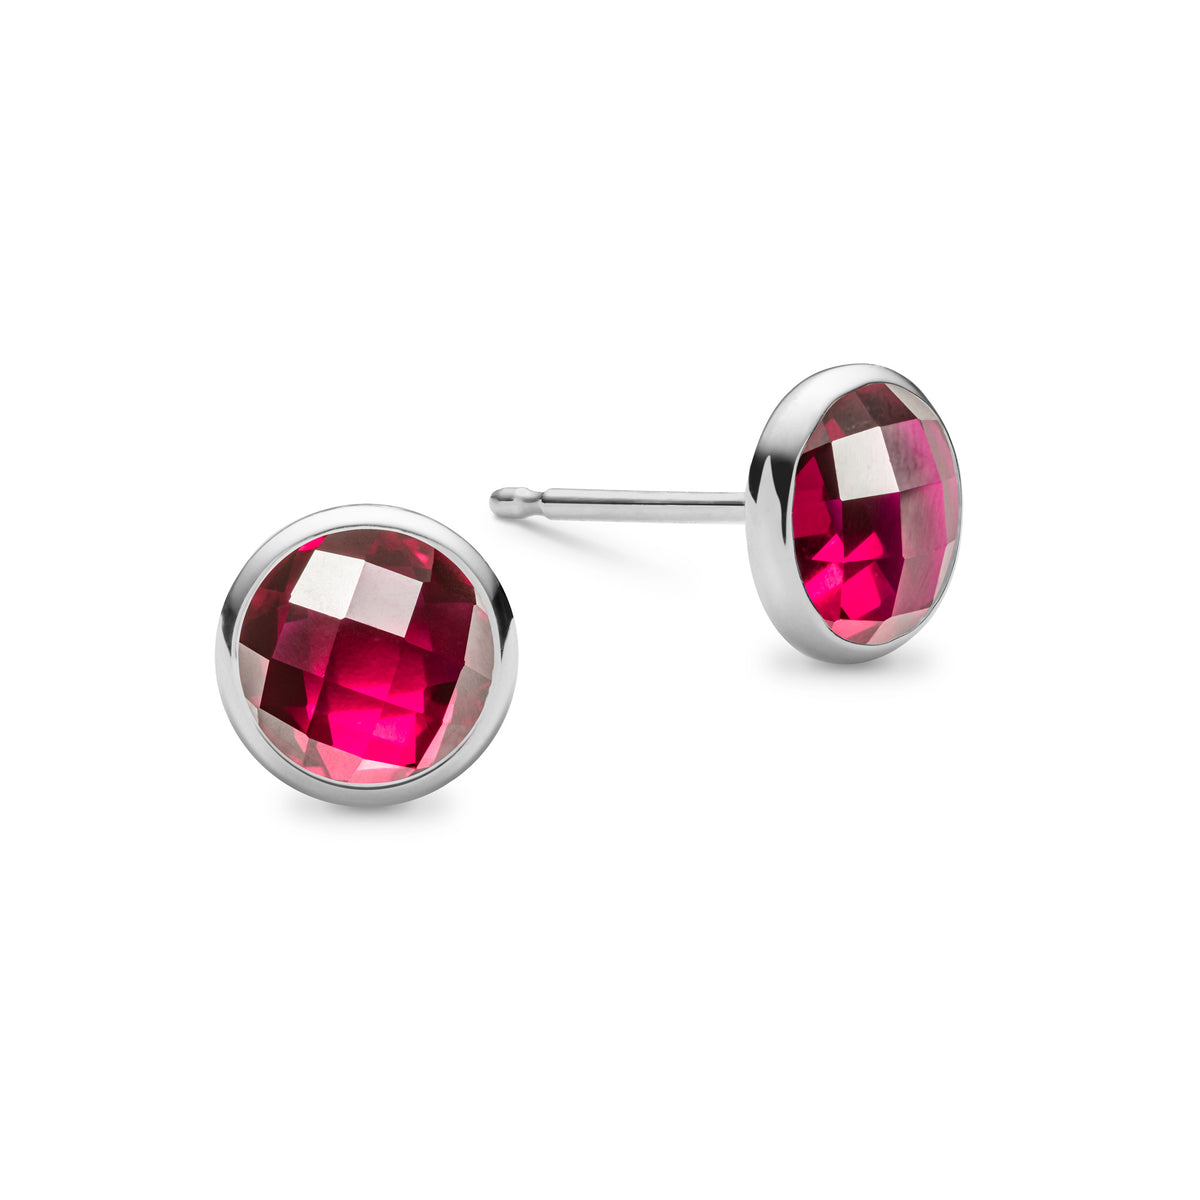 Share 217+ ruby and silver earrings